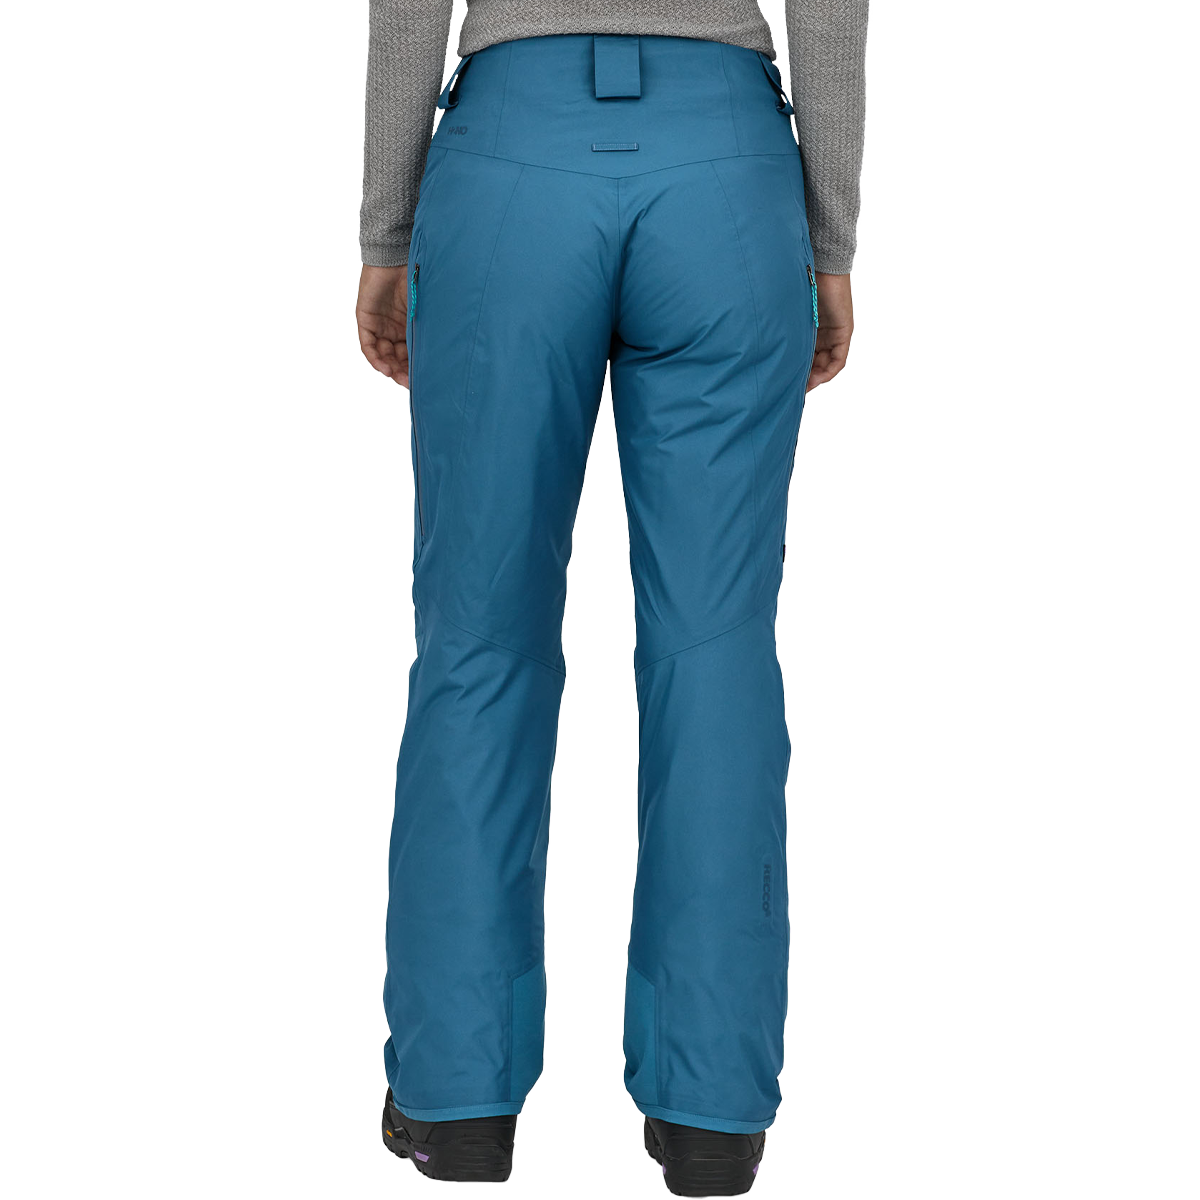 Women's Insulated Powder Town Pants alternate view